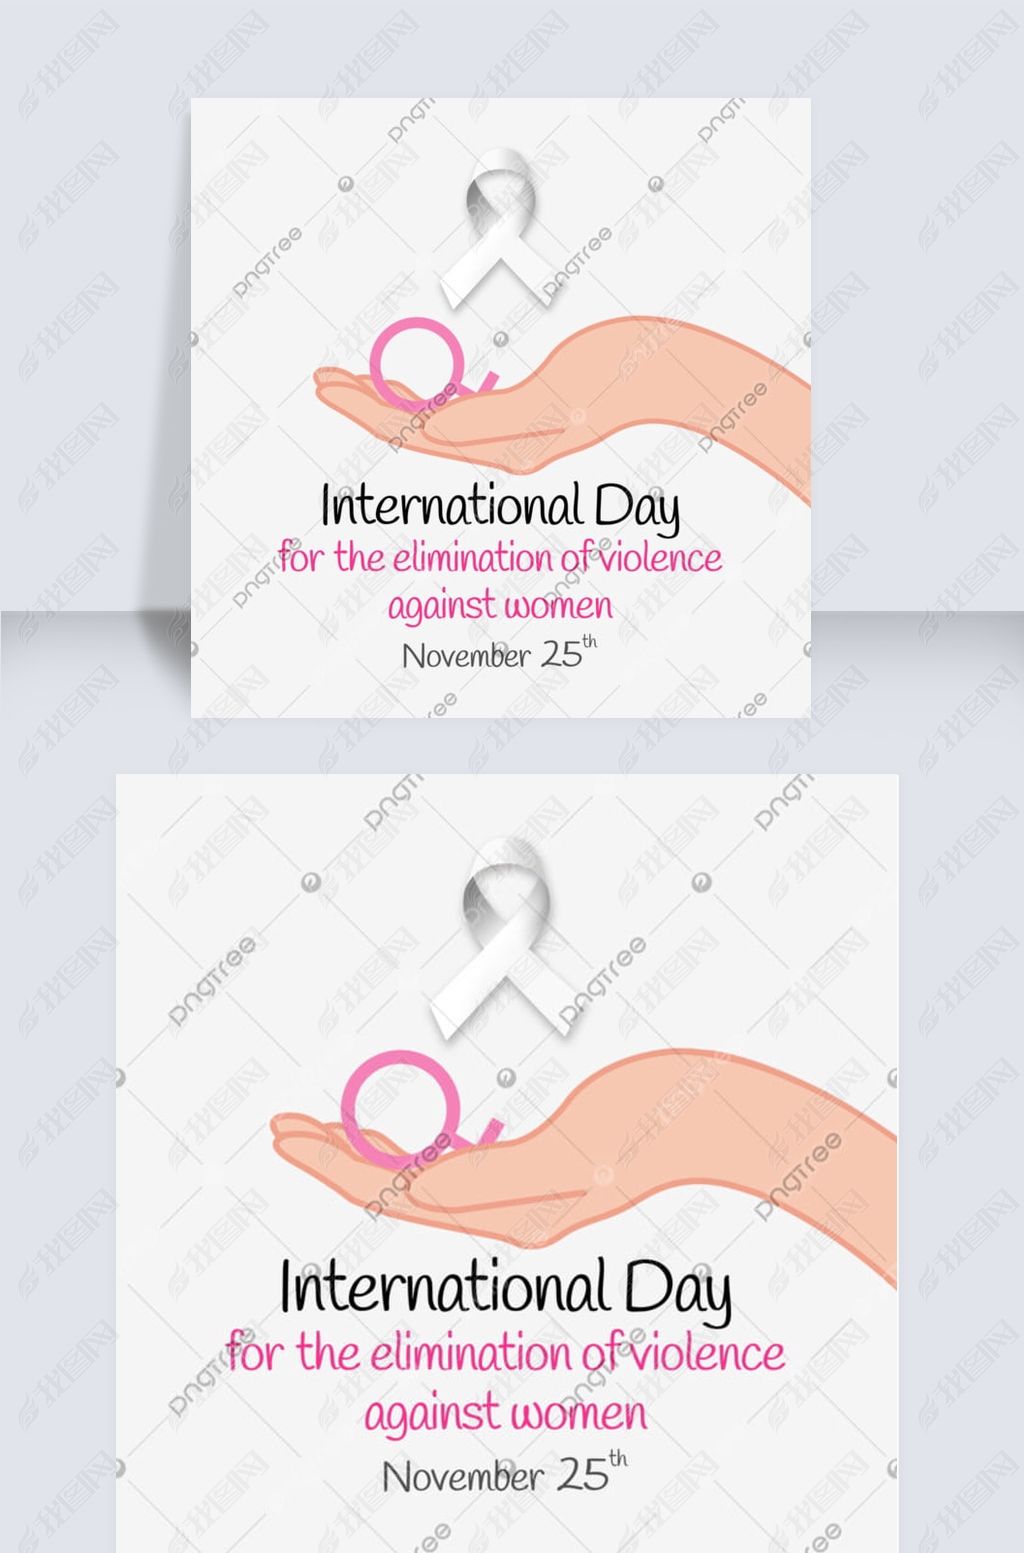 ǻŮday for the elimination of violence against women